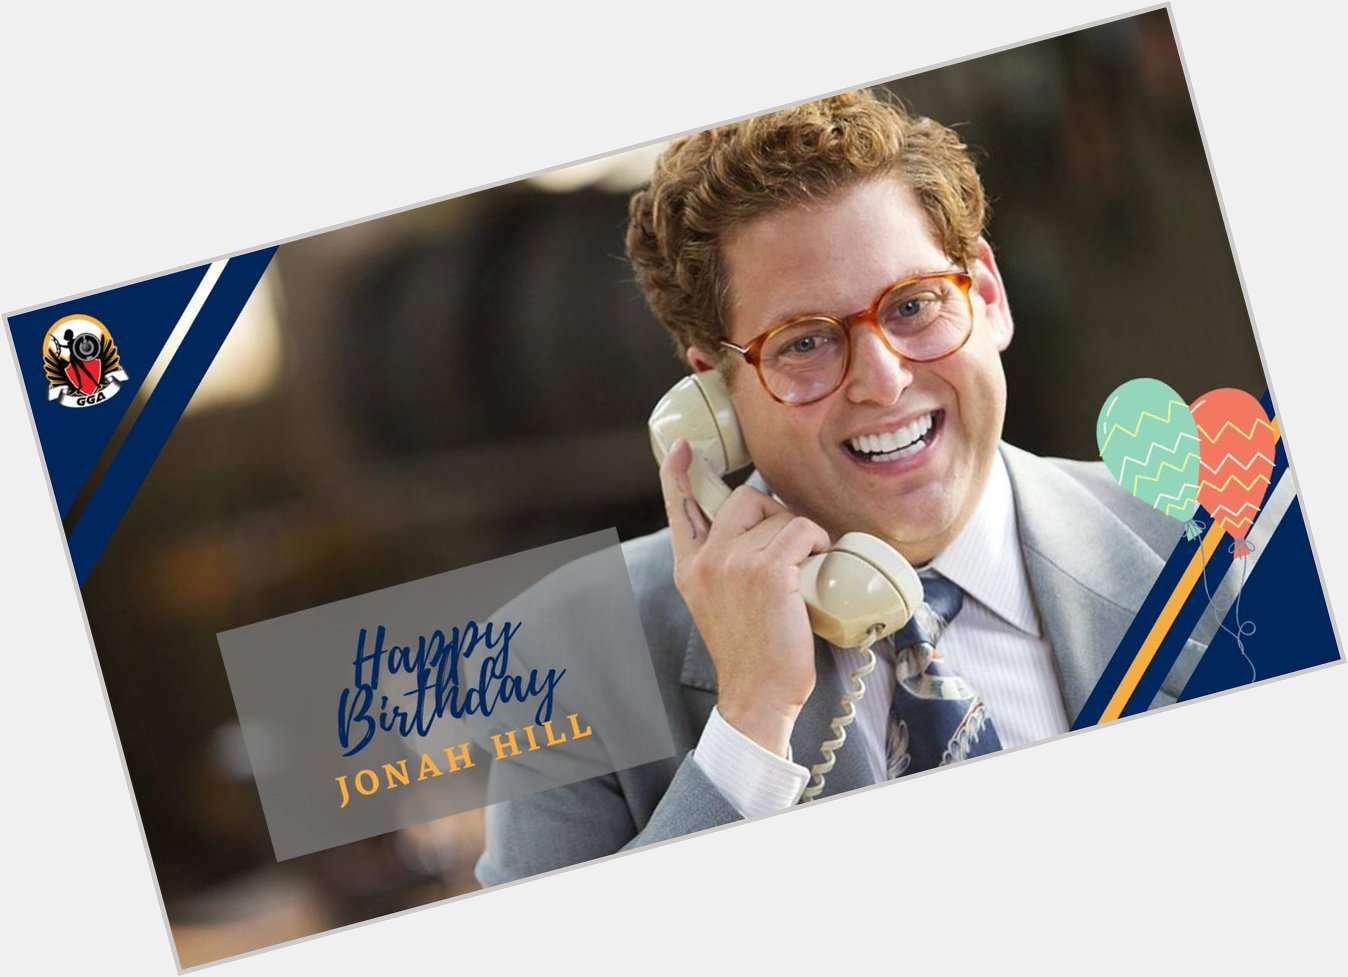 Happy Birthday, Jonah Hill!  Which of his roles is your favorite?  